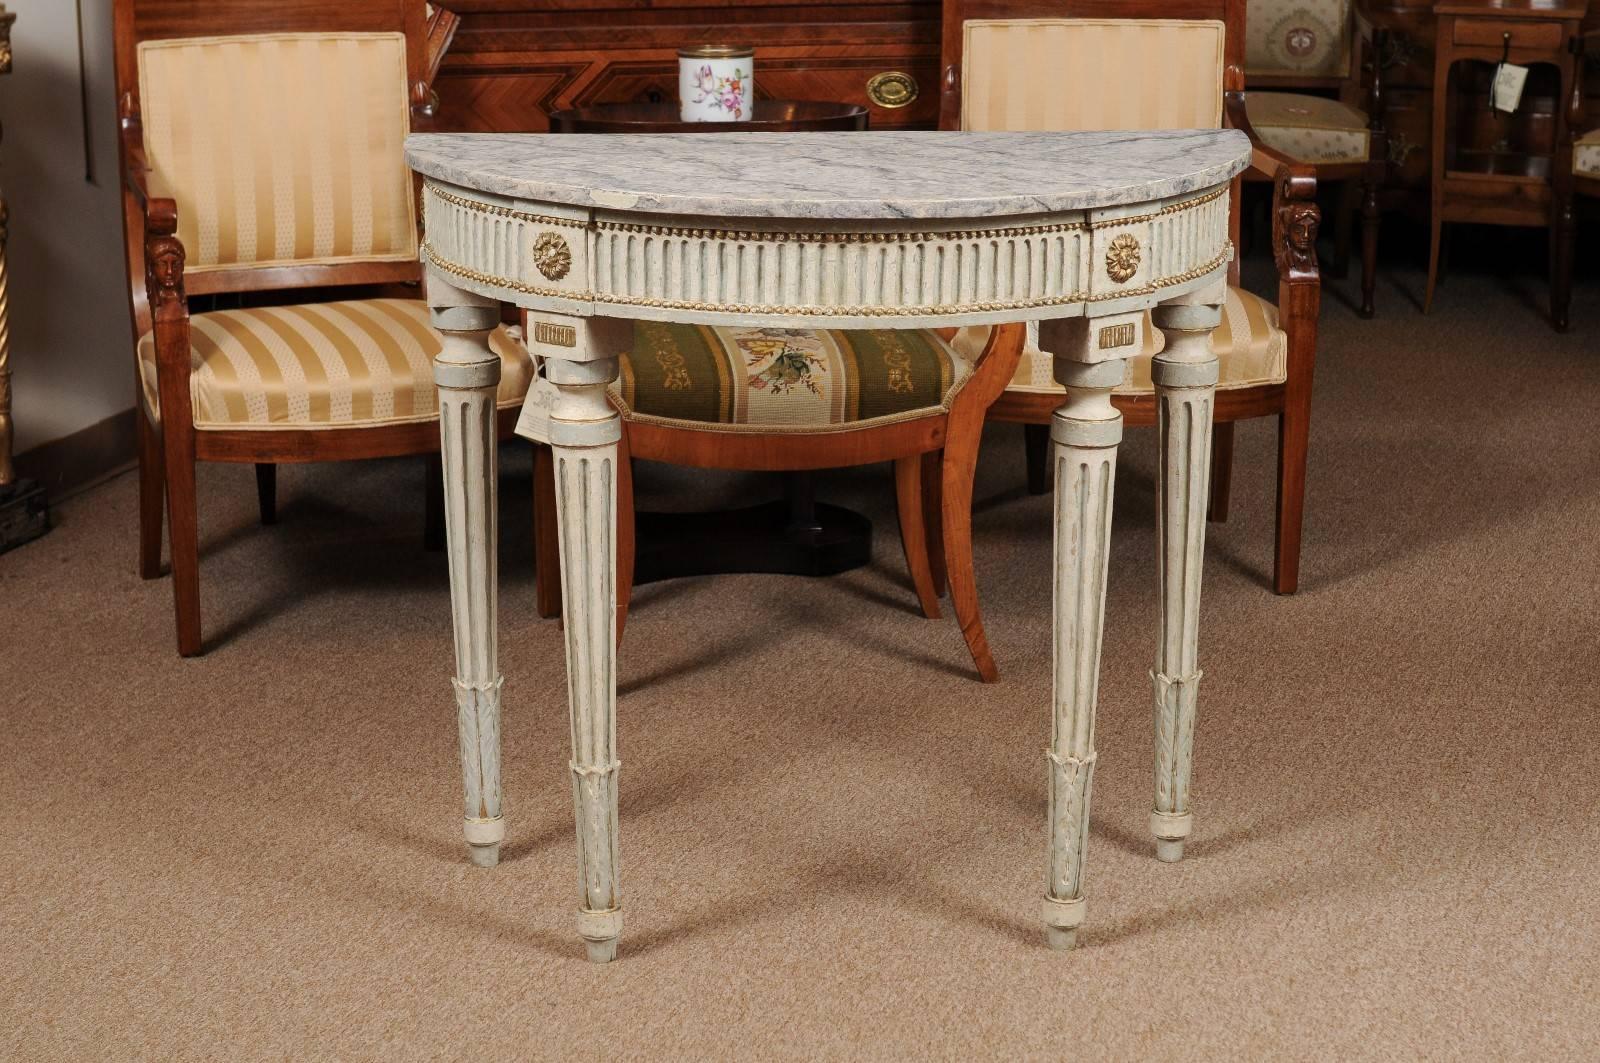 Louis XVI style demilune console table in painted finish featuring fluted detail and faux marbleized top, 19th century, France.